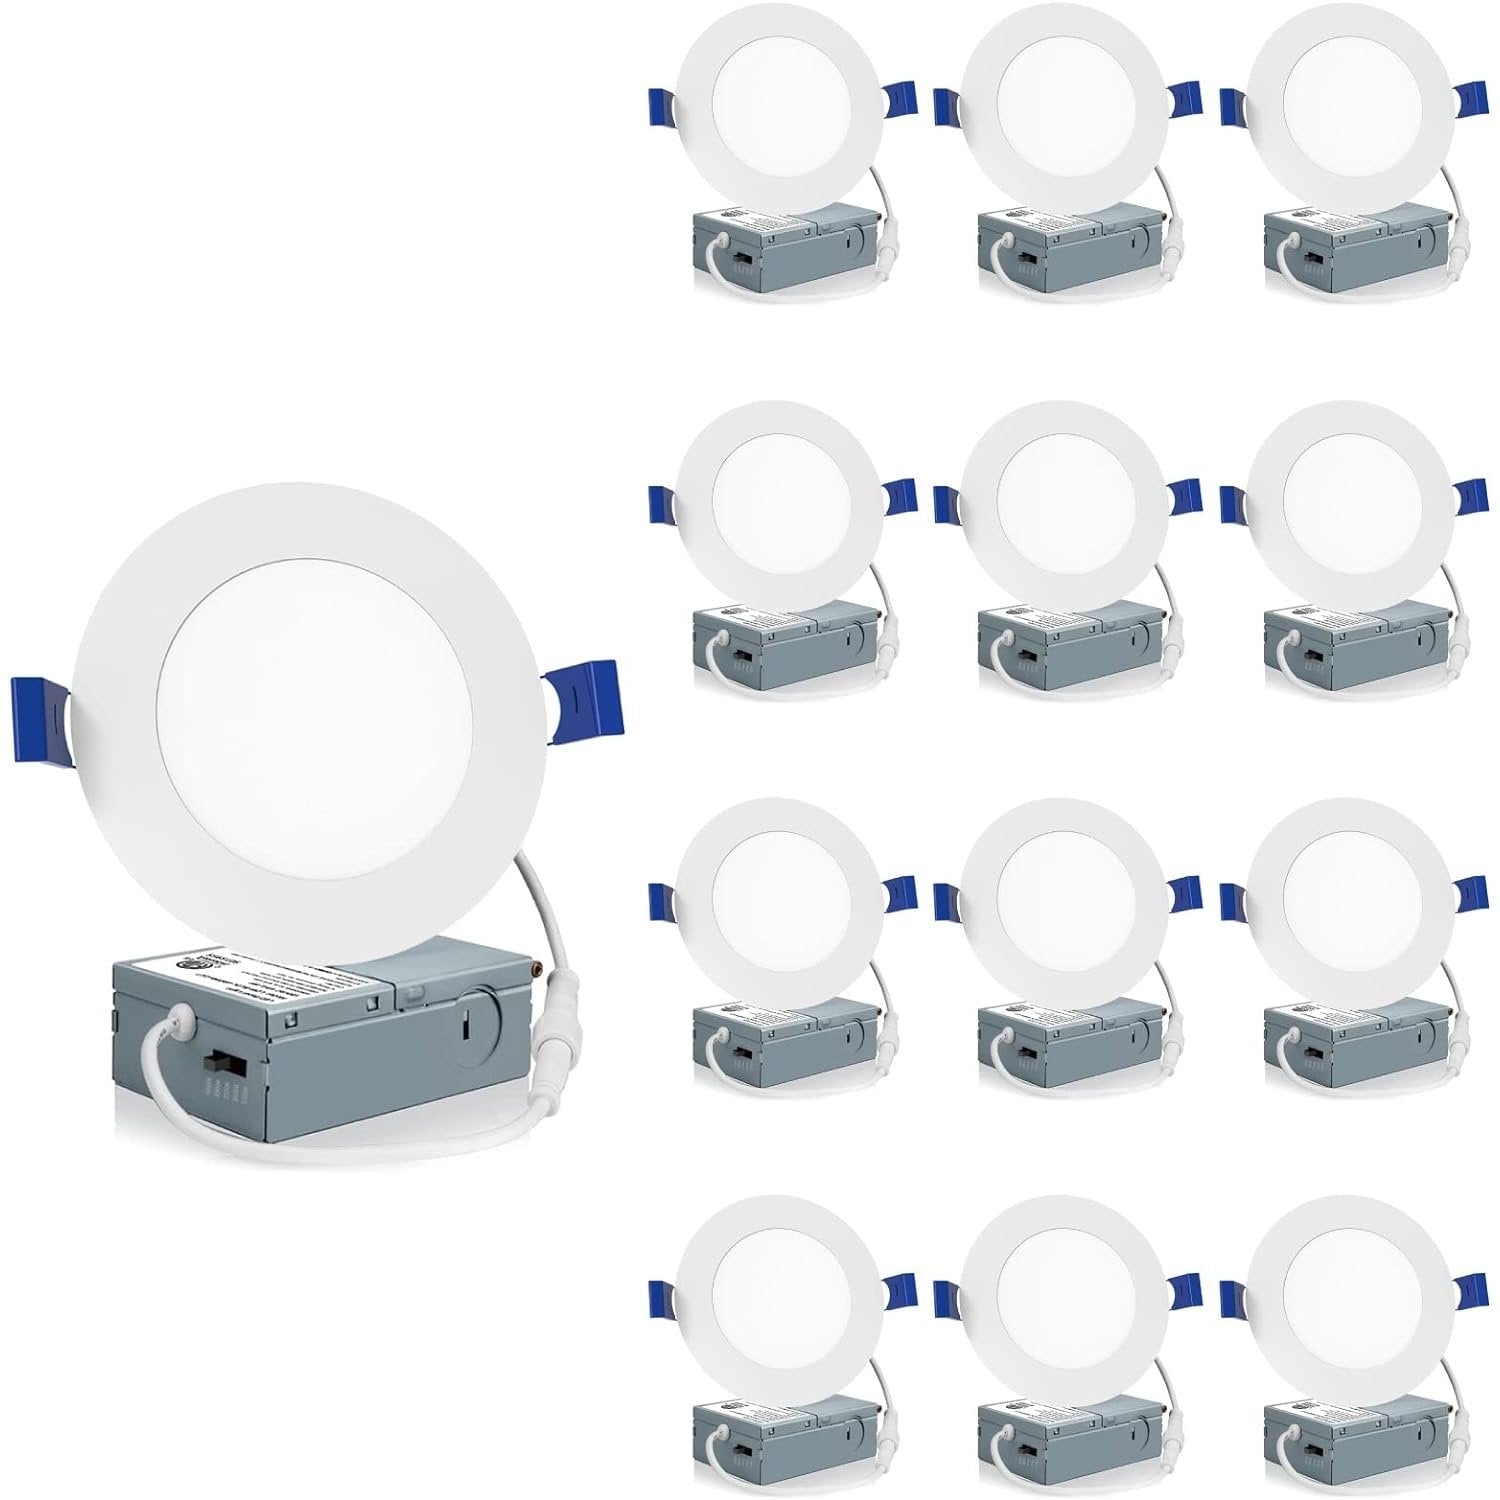 Meconard 12 Pack 6 Inch 5CCT LED Canless Recessed Lighting with Night Light, 2700K/3000K/3500K/4000K/5000K Selectable Ultra-Thin LED Ceiling Lights, 12W=110W, 1050LM, Dimmable Wafer Downlight ETL&FCC